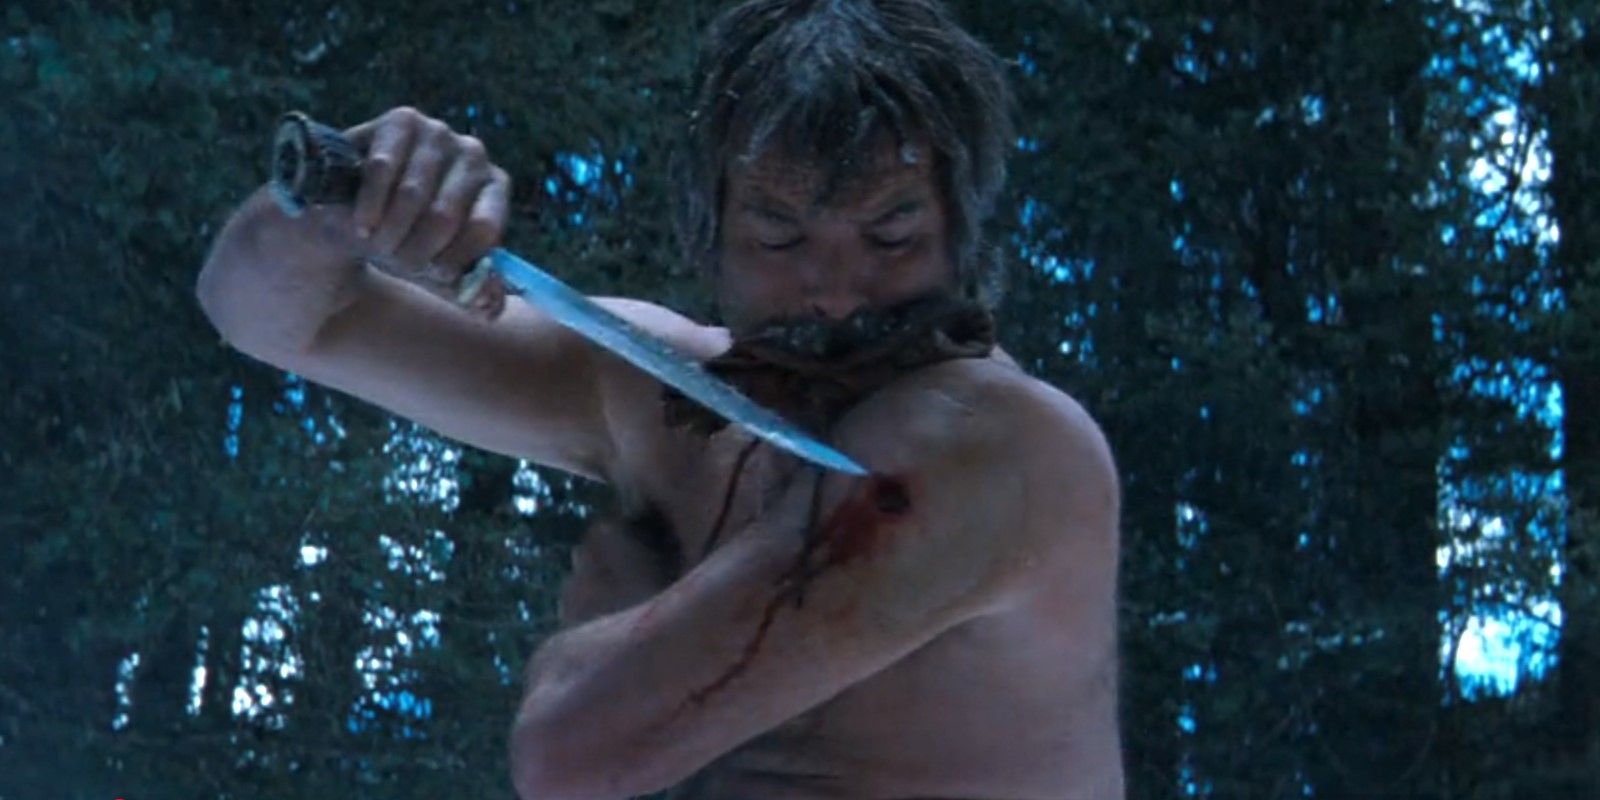 A shirtless Gideon (Pierce Brosnan) digs a bullet out of his arm with a hunting knife while biting on a rag in Seraphim Falls